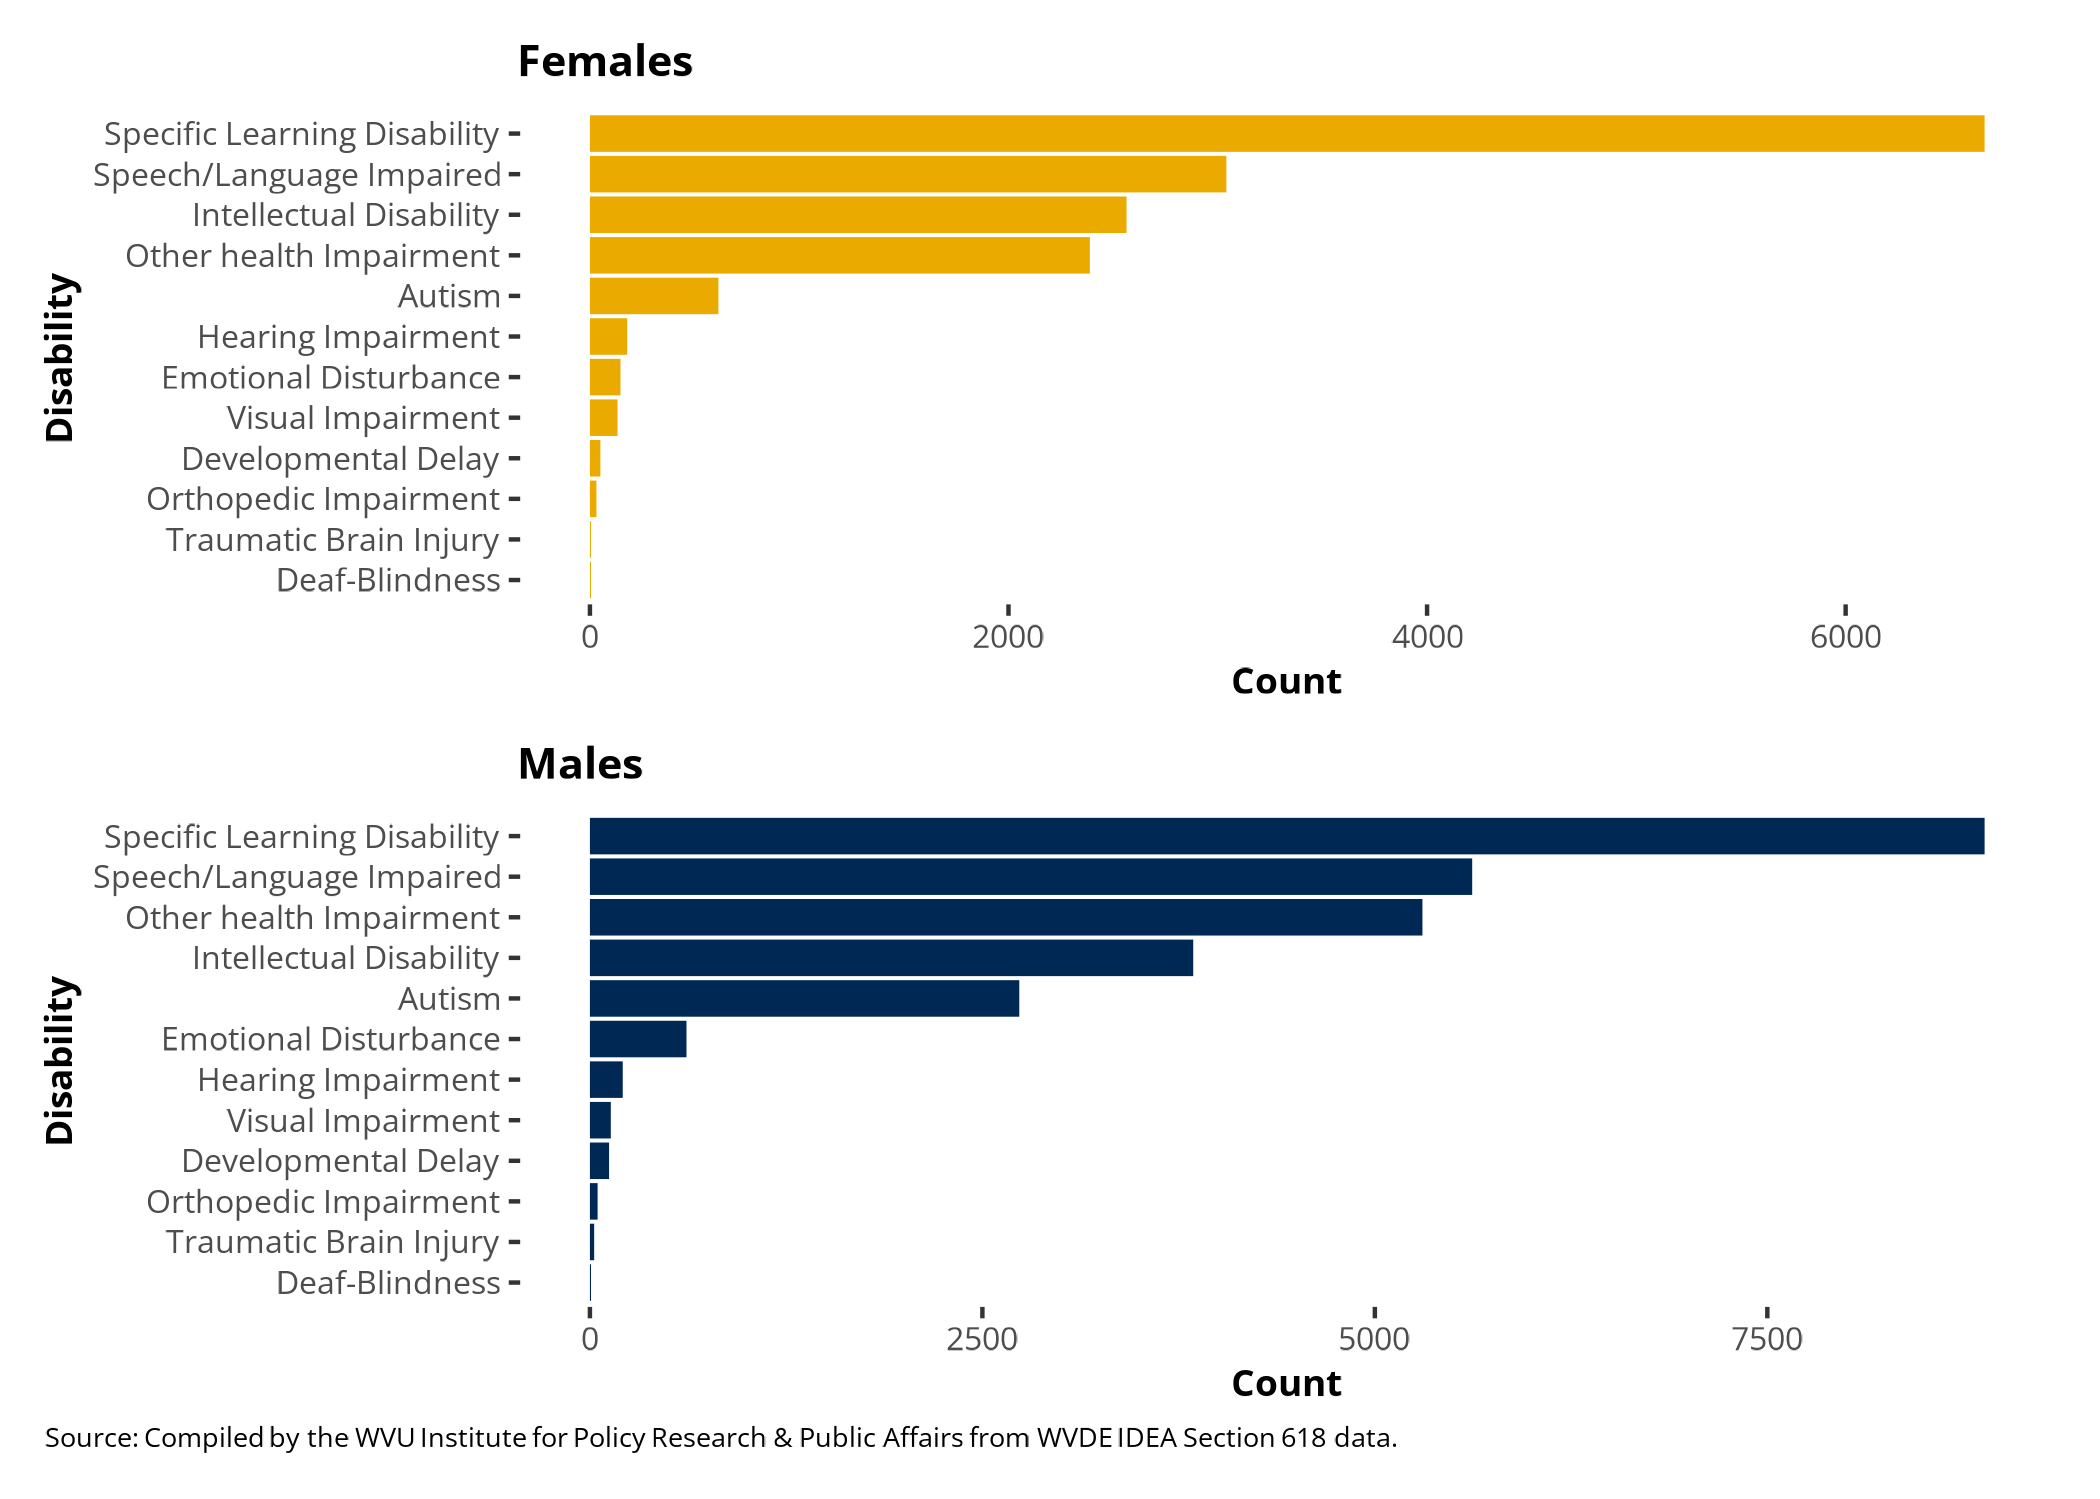 Figure 3: A bar graph of disability category counts for males and females.